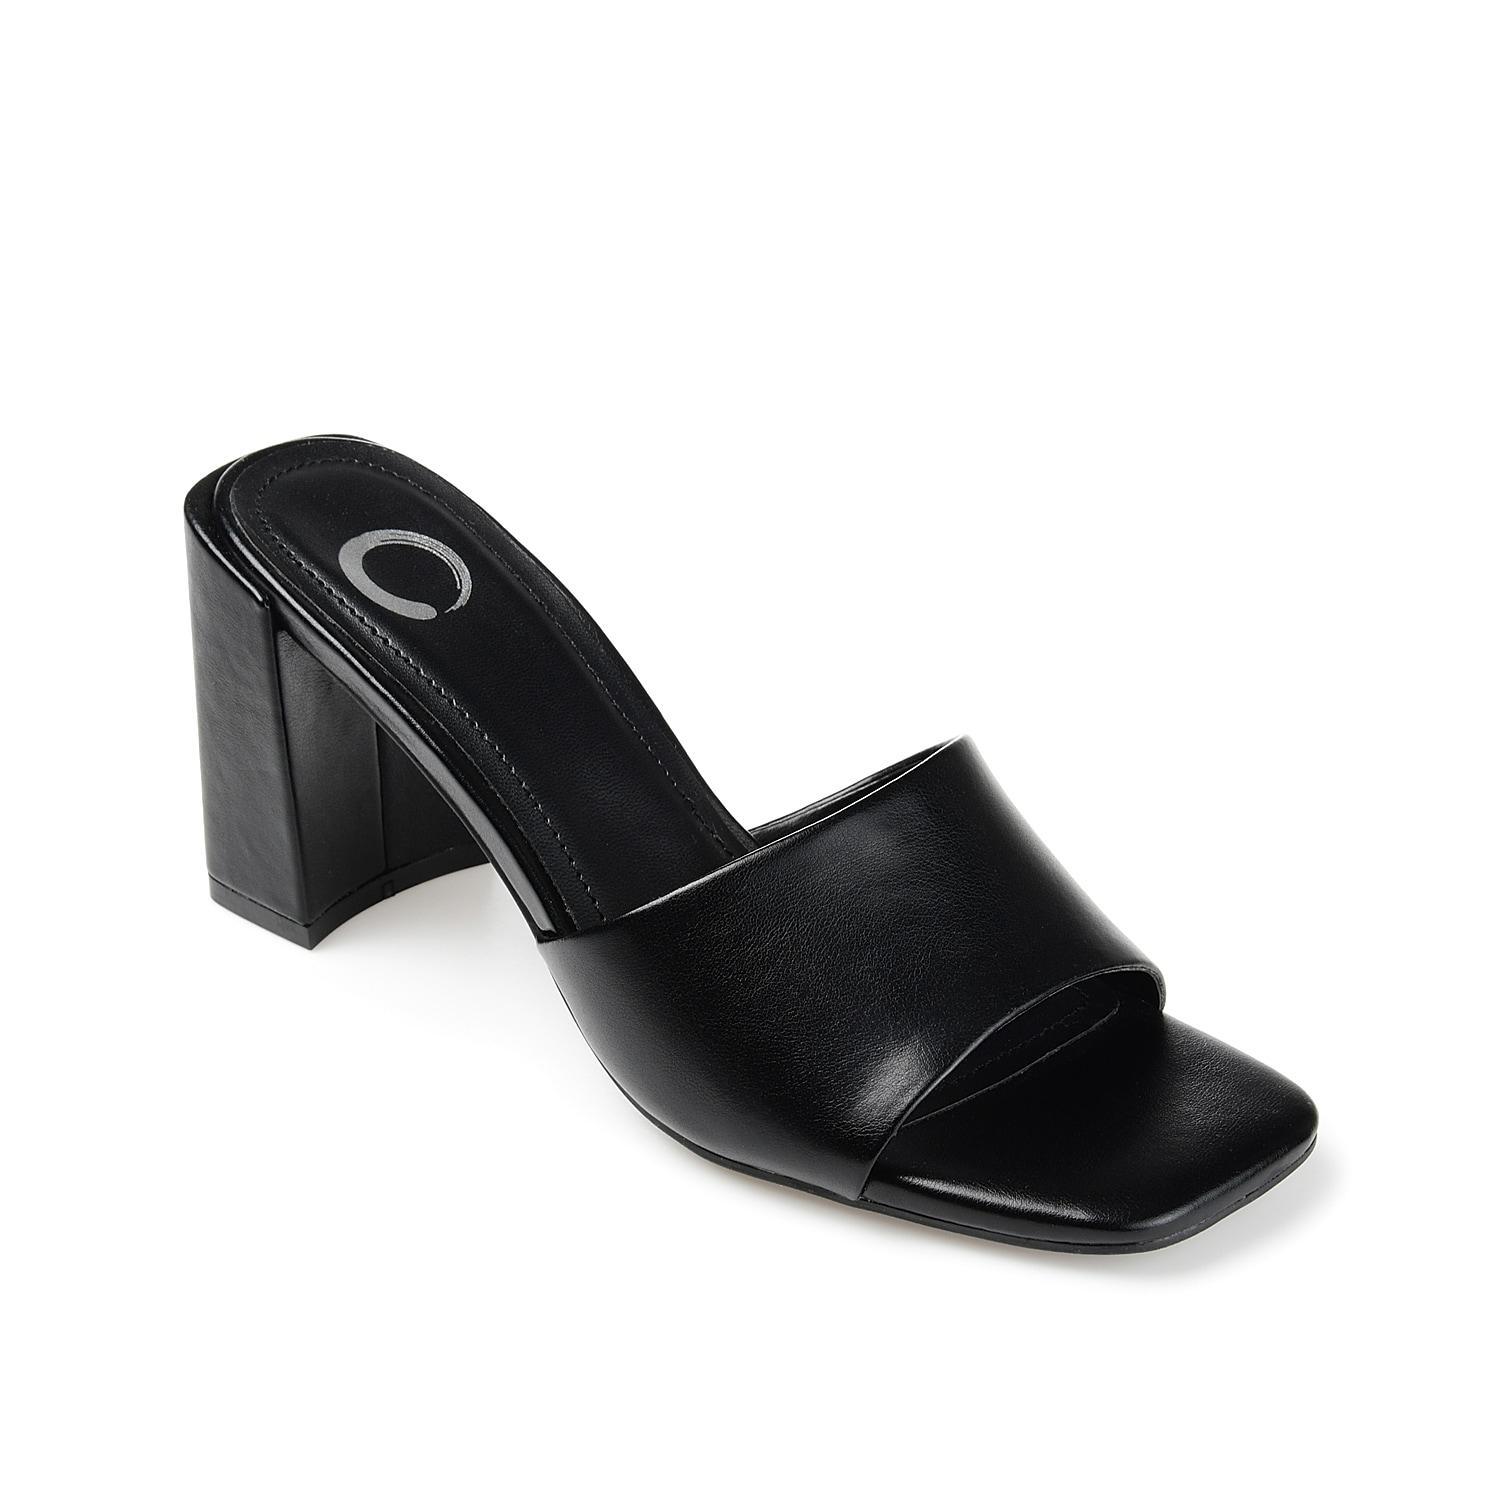 Journee Collection Womens Alisia Sandals Womens Shoes Product Image